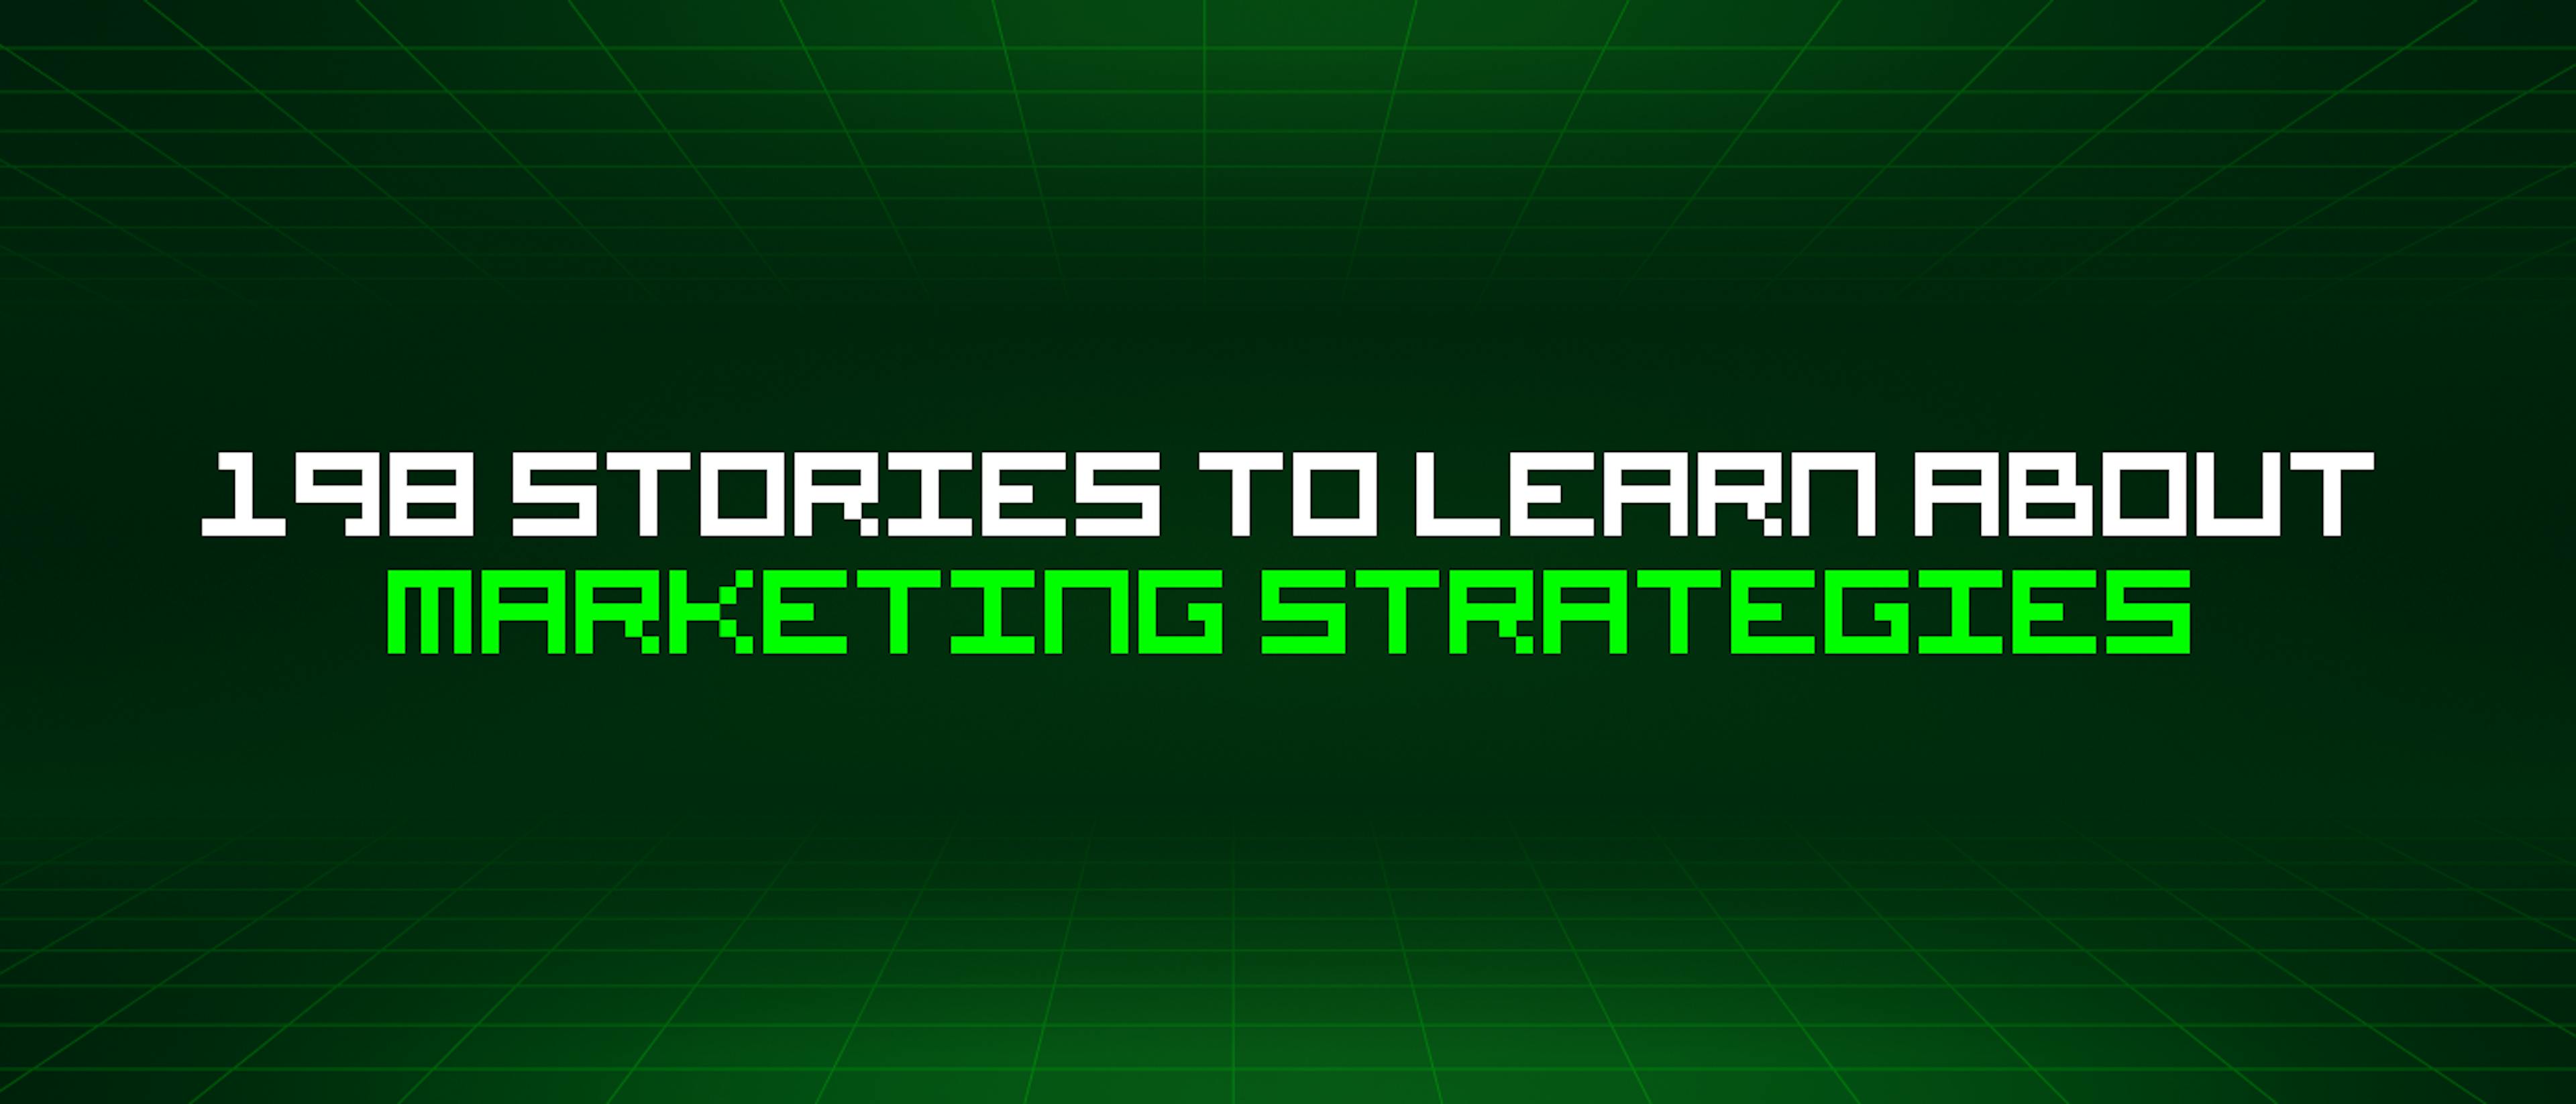 featured image - 198 Stories To Learn About Marketing Strategies